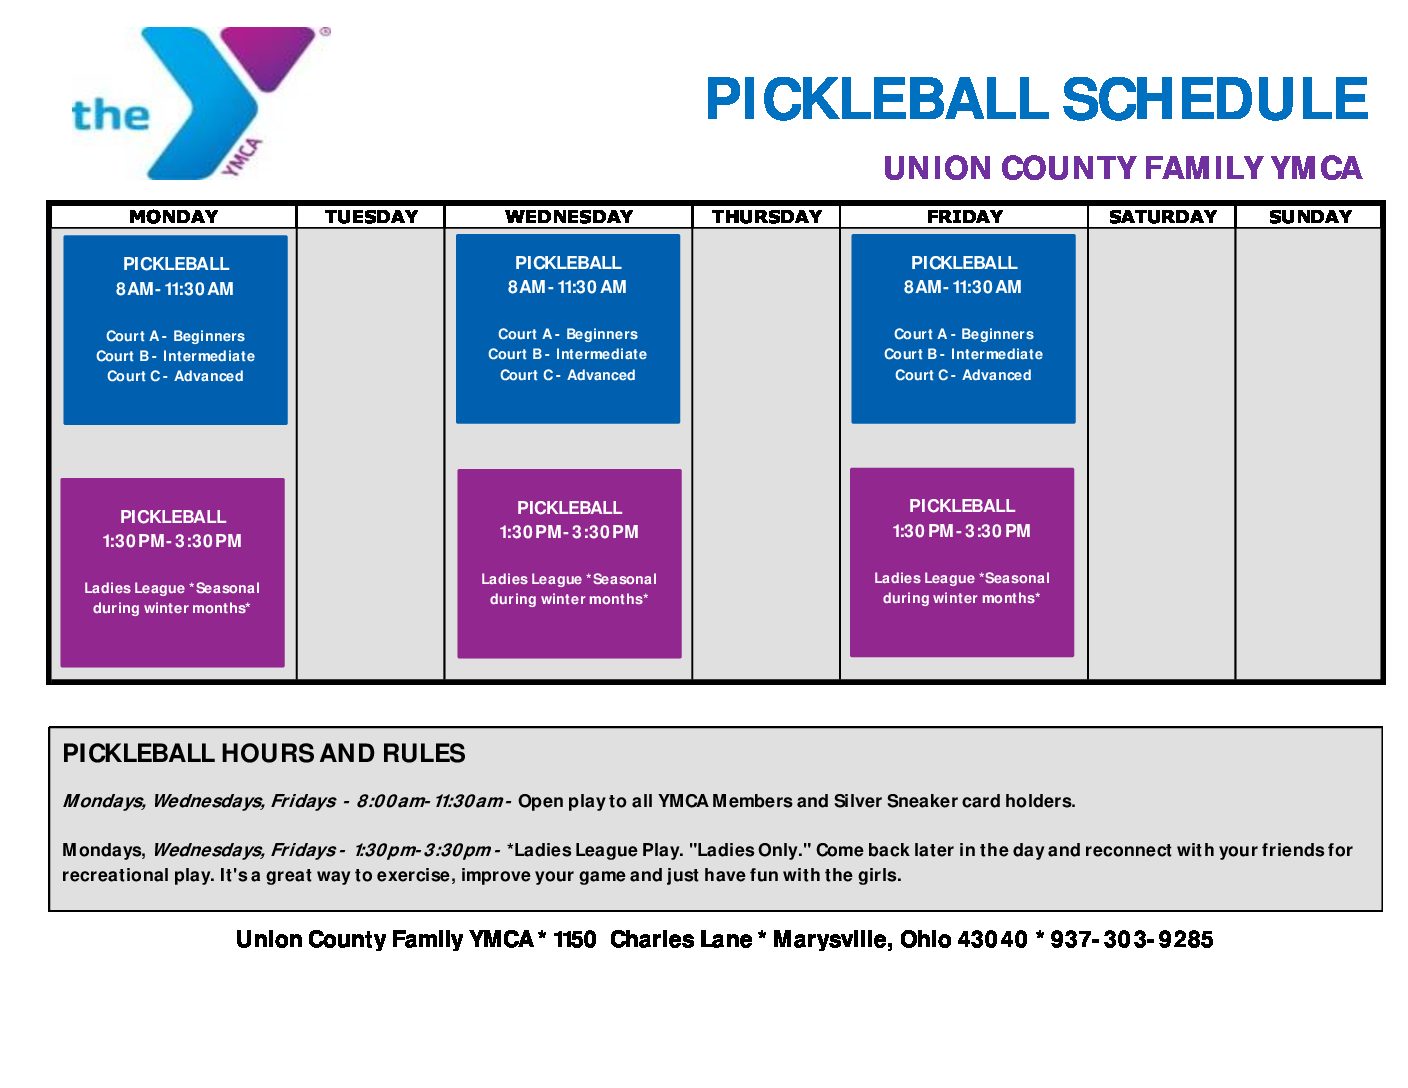 Pickleball Schedule 2022 UNION COUNTY FAMILY YMCA